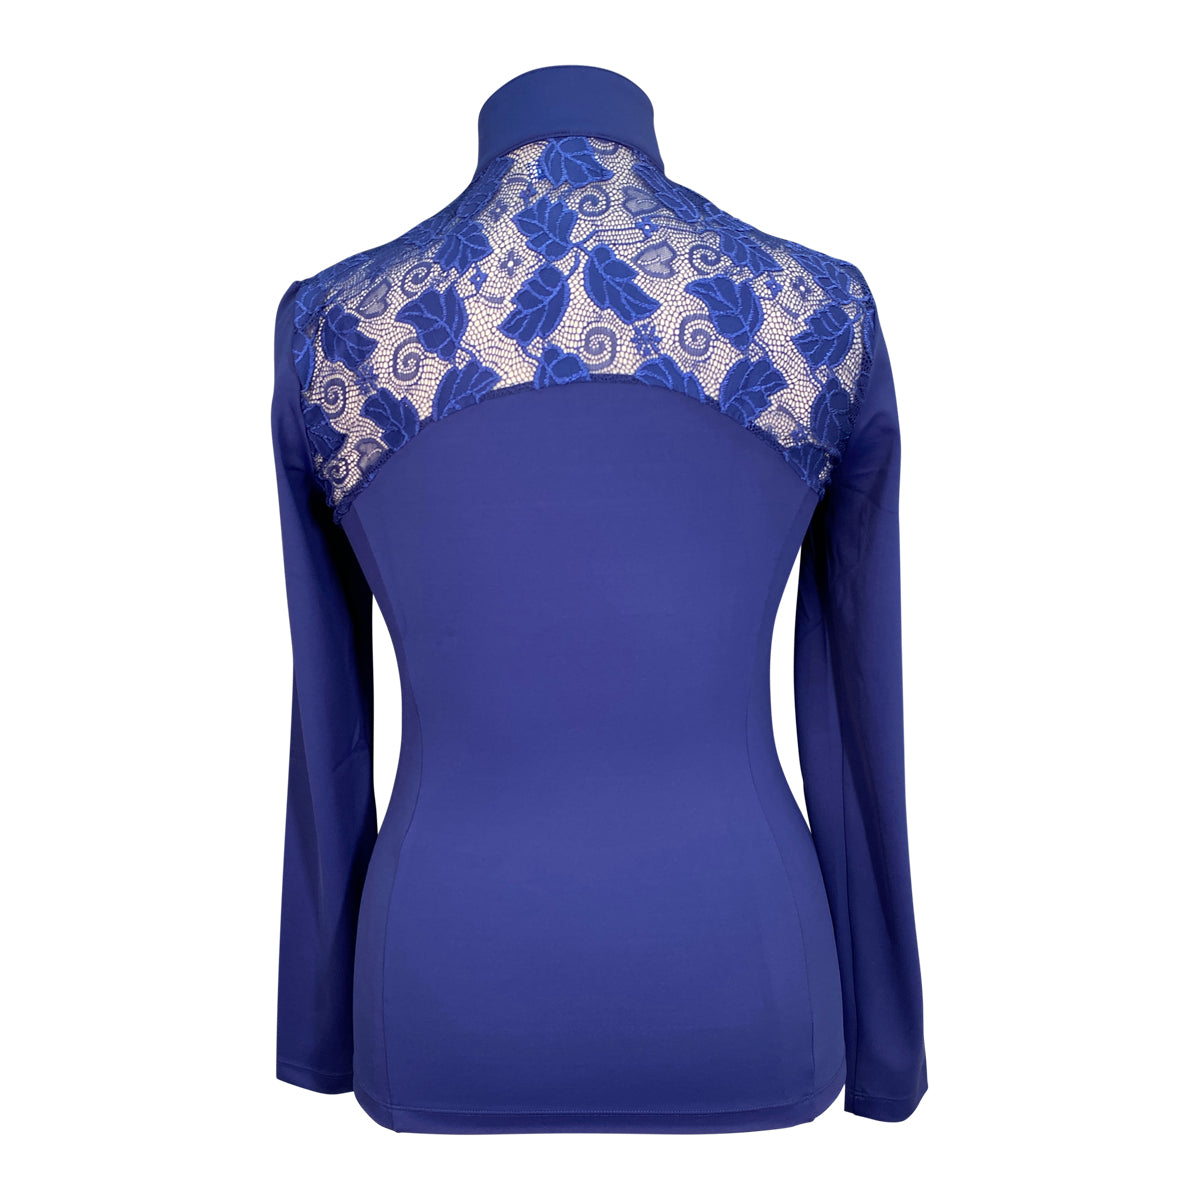 Equisite 'Alice' Shirt in Blue